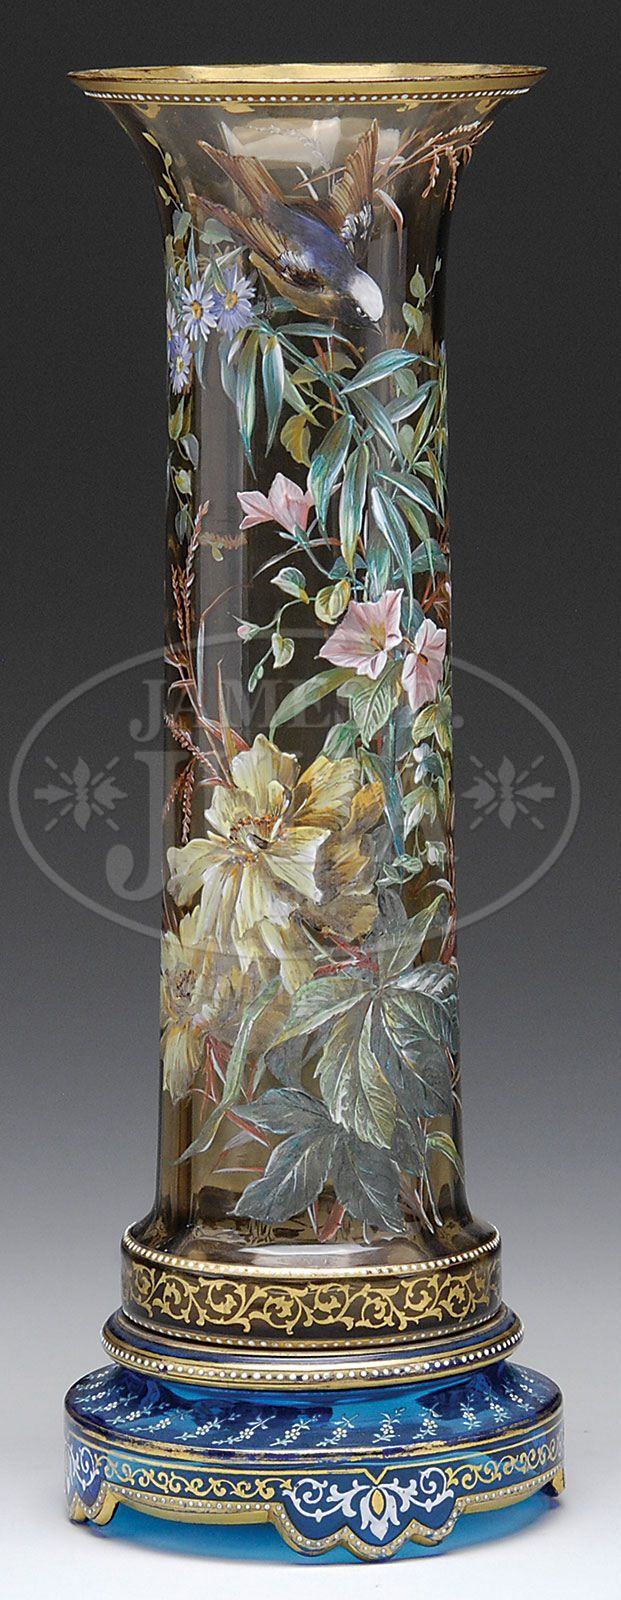 14 Wonderful Lsa International Vases Poland 2024 free download lsa international vases poland of 46 best other pretty glassware images on pinterest antique glass for the entire vase has an enameled decoration with a blue bird resting amidst the flowers 